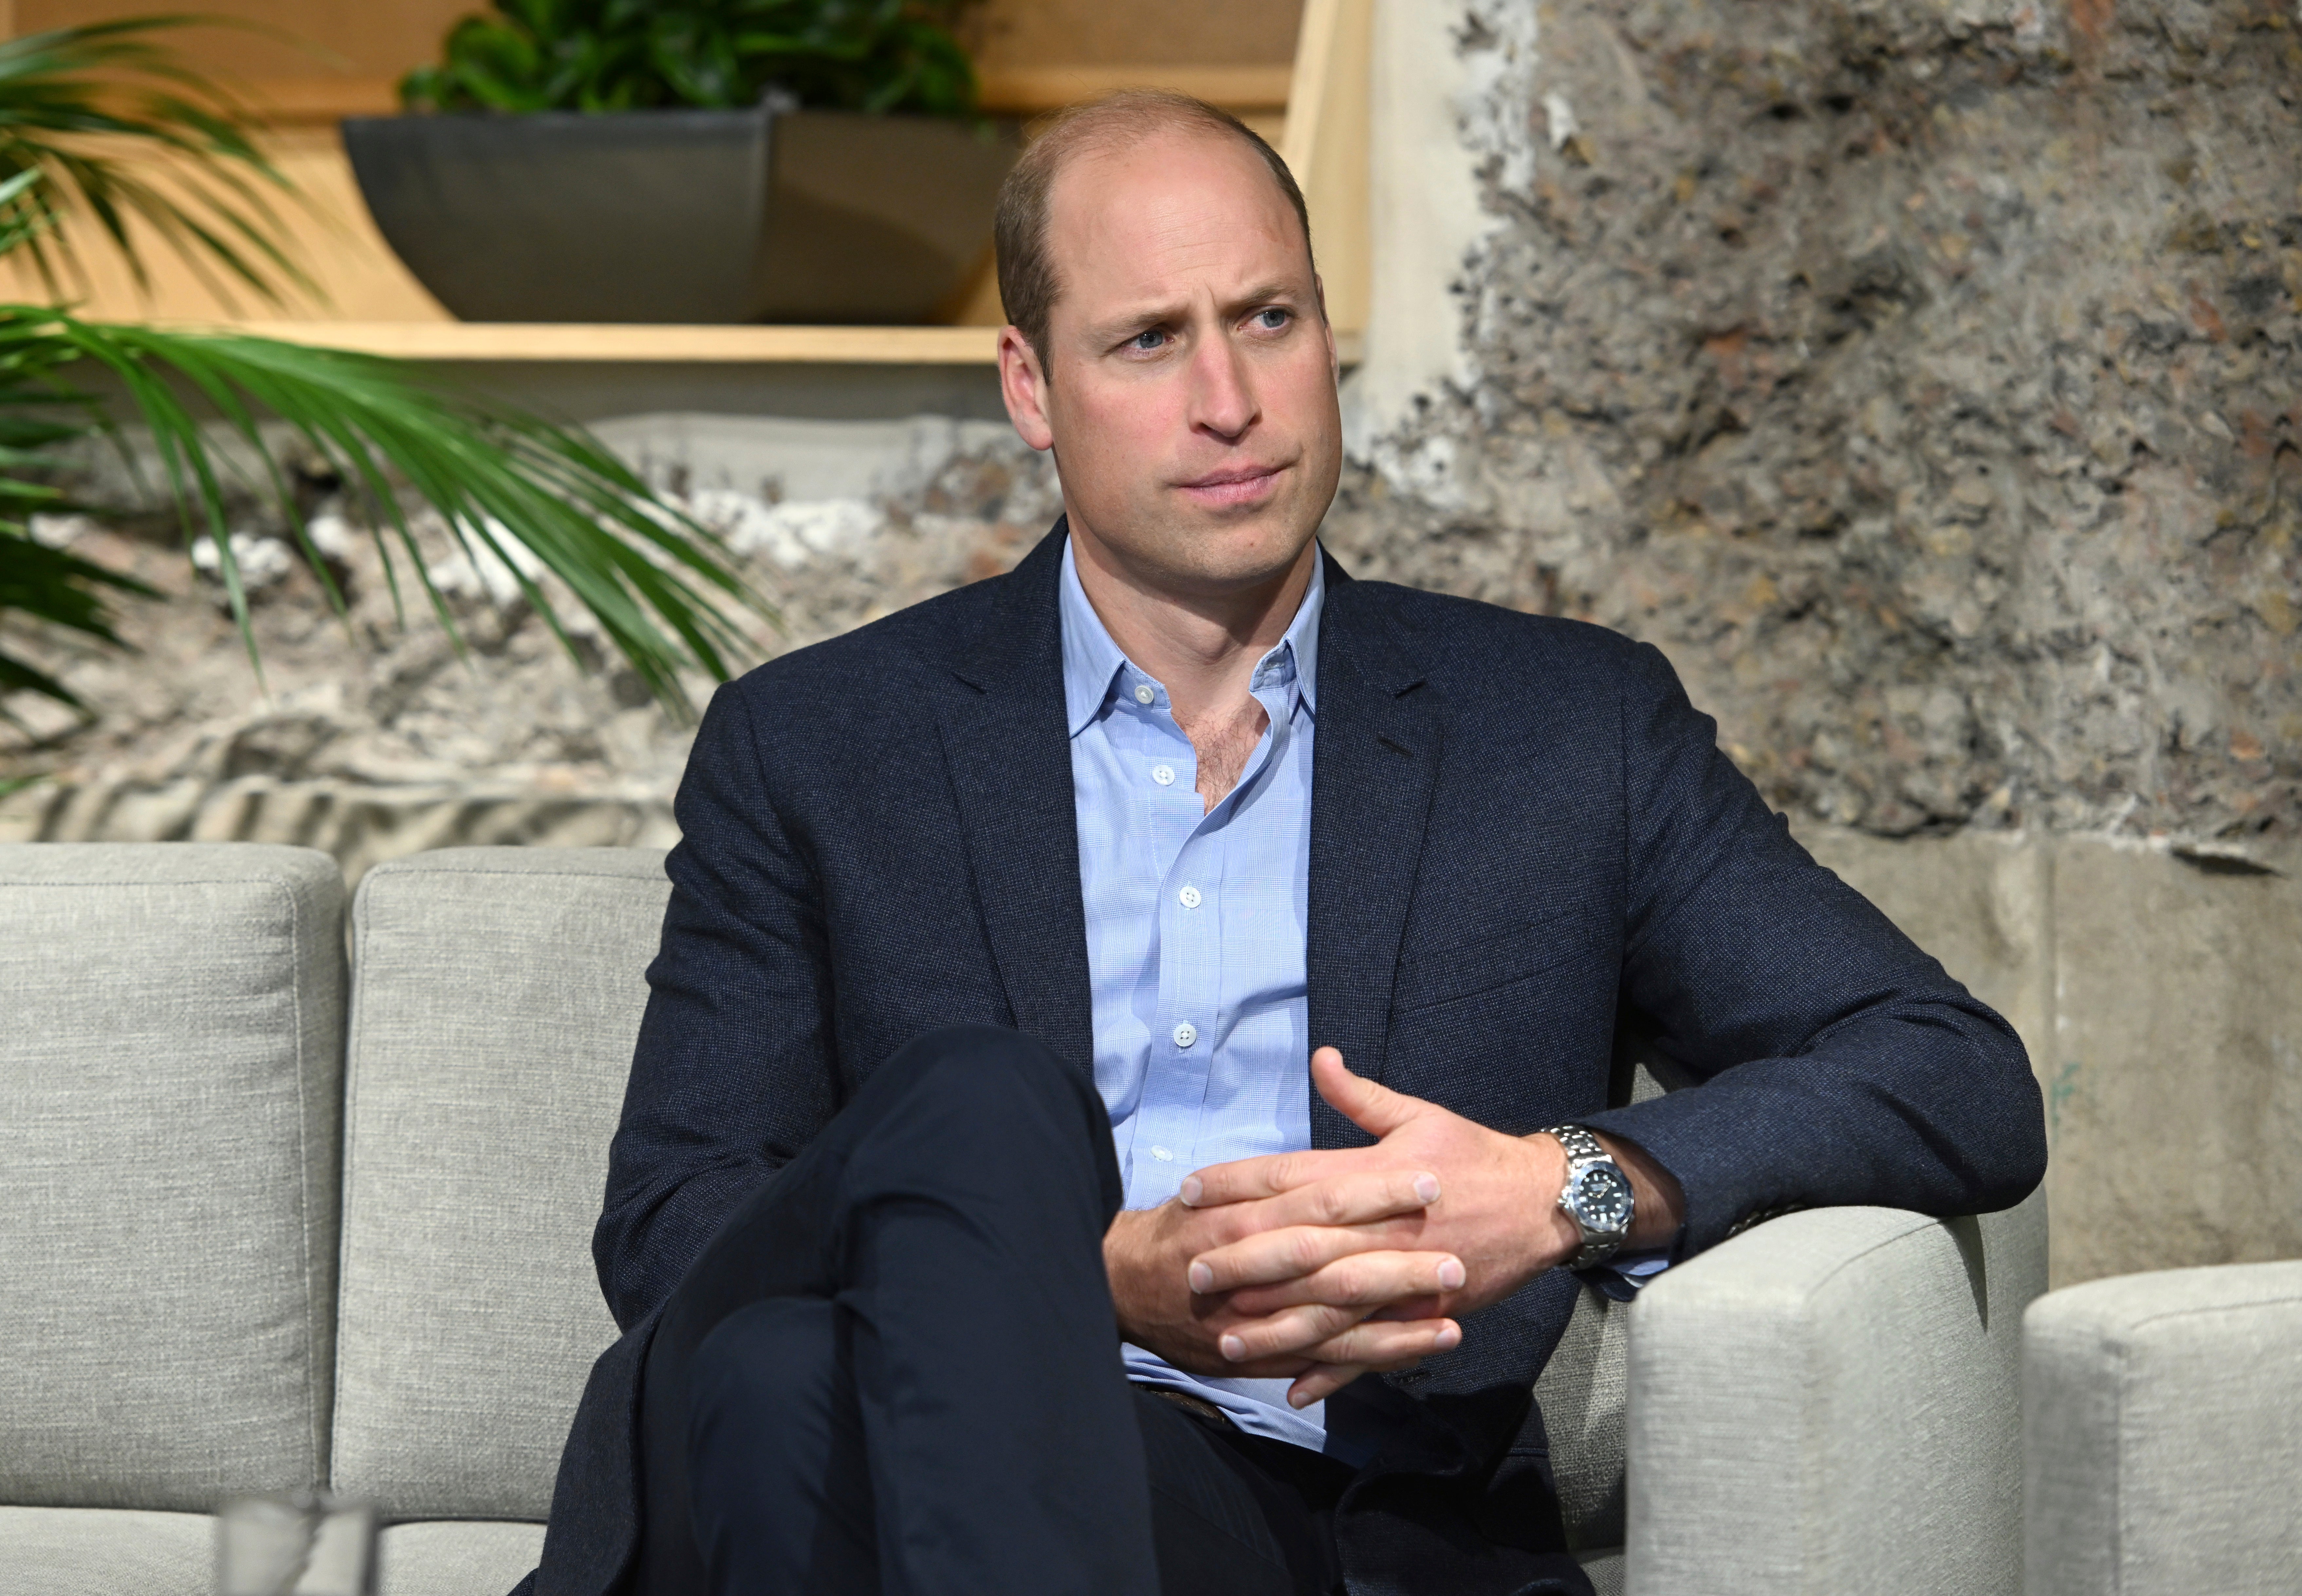 Prince William's Earthshot Prize Trip to Singapore: All the Details